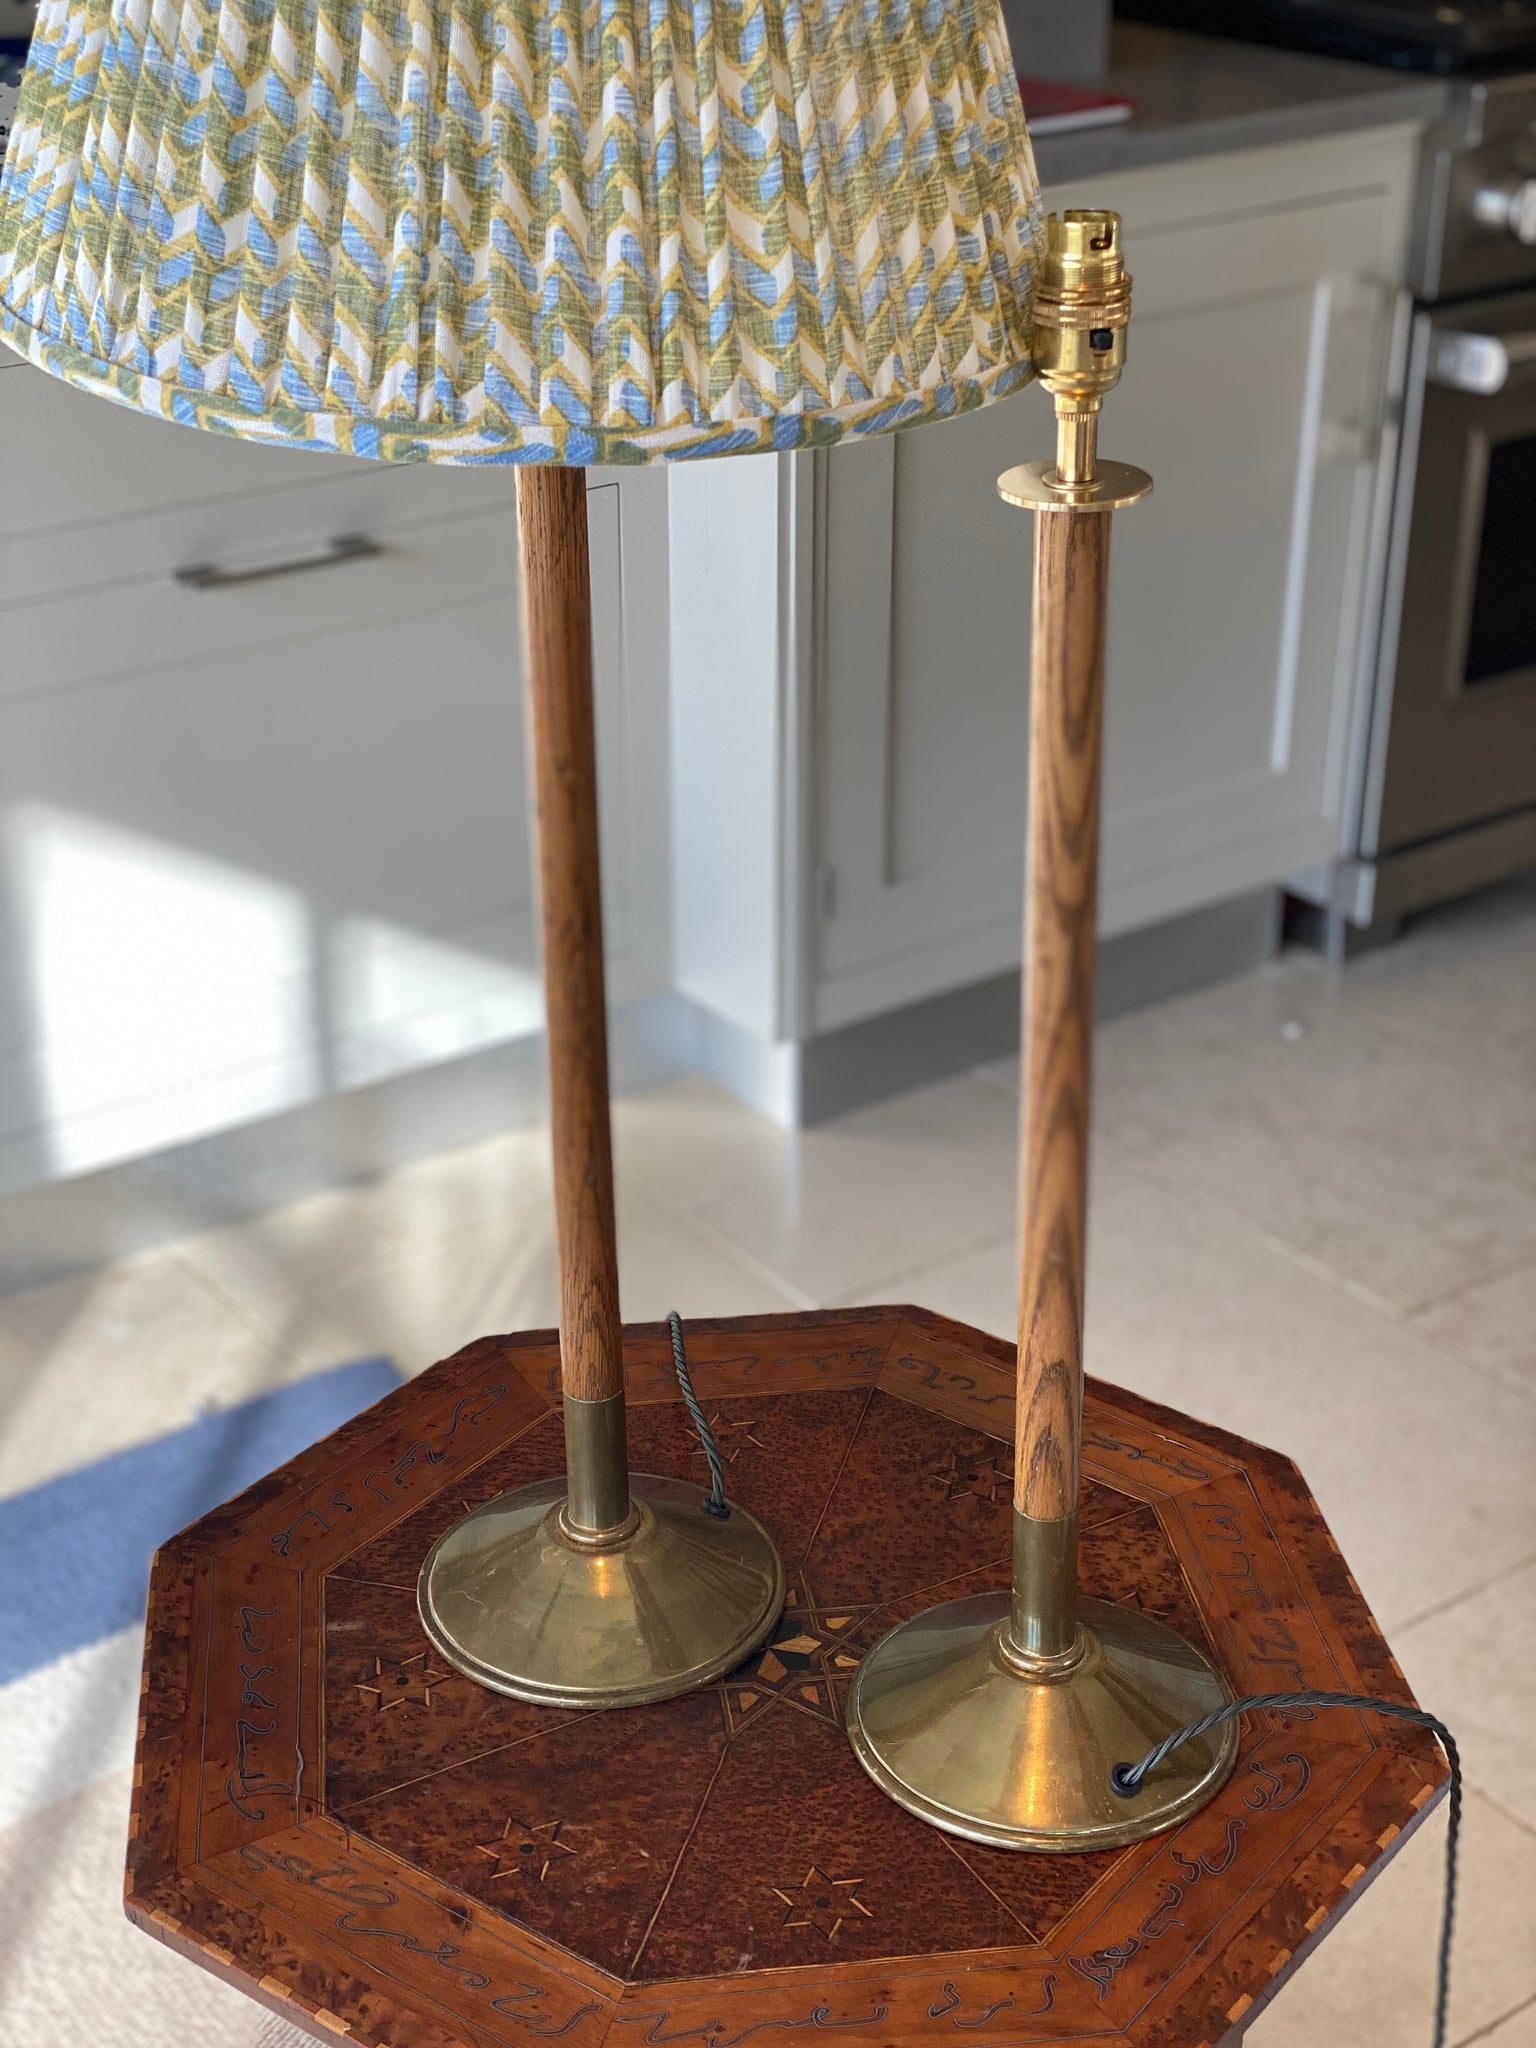 Pair of Tall Oak Table lamps with brass based